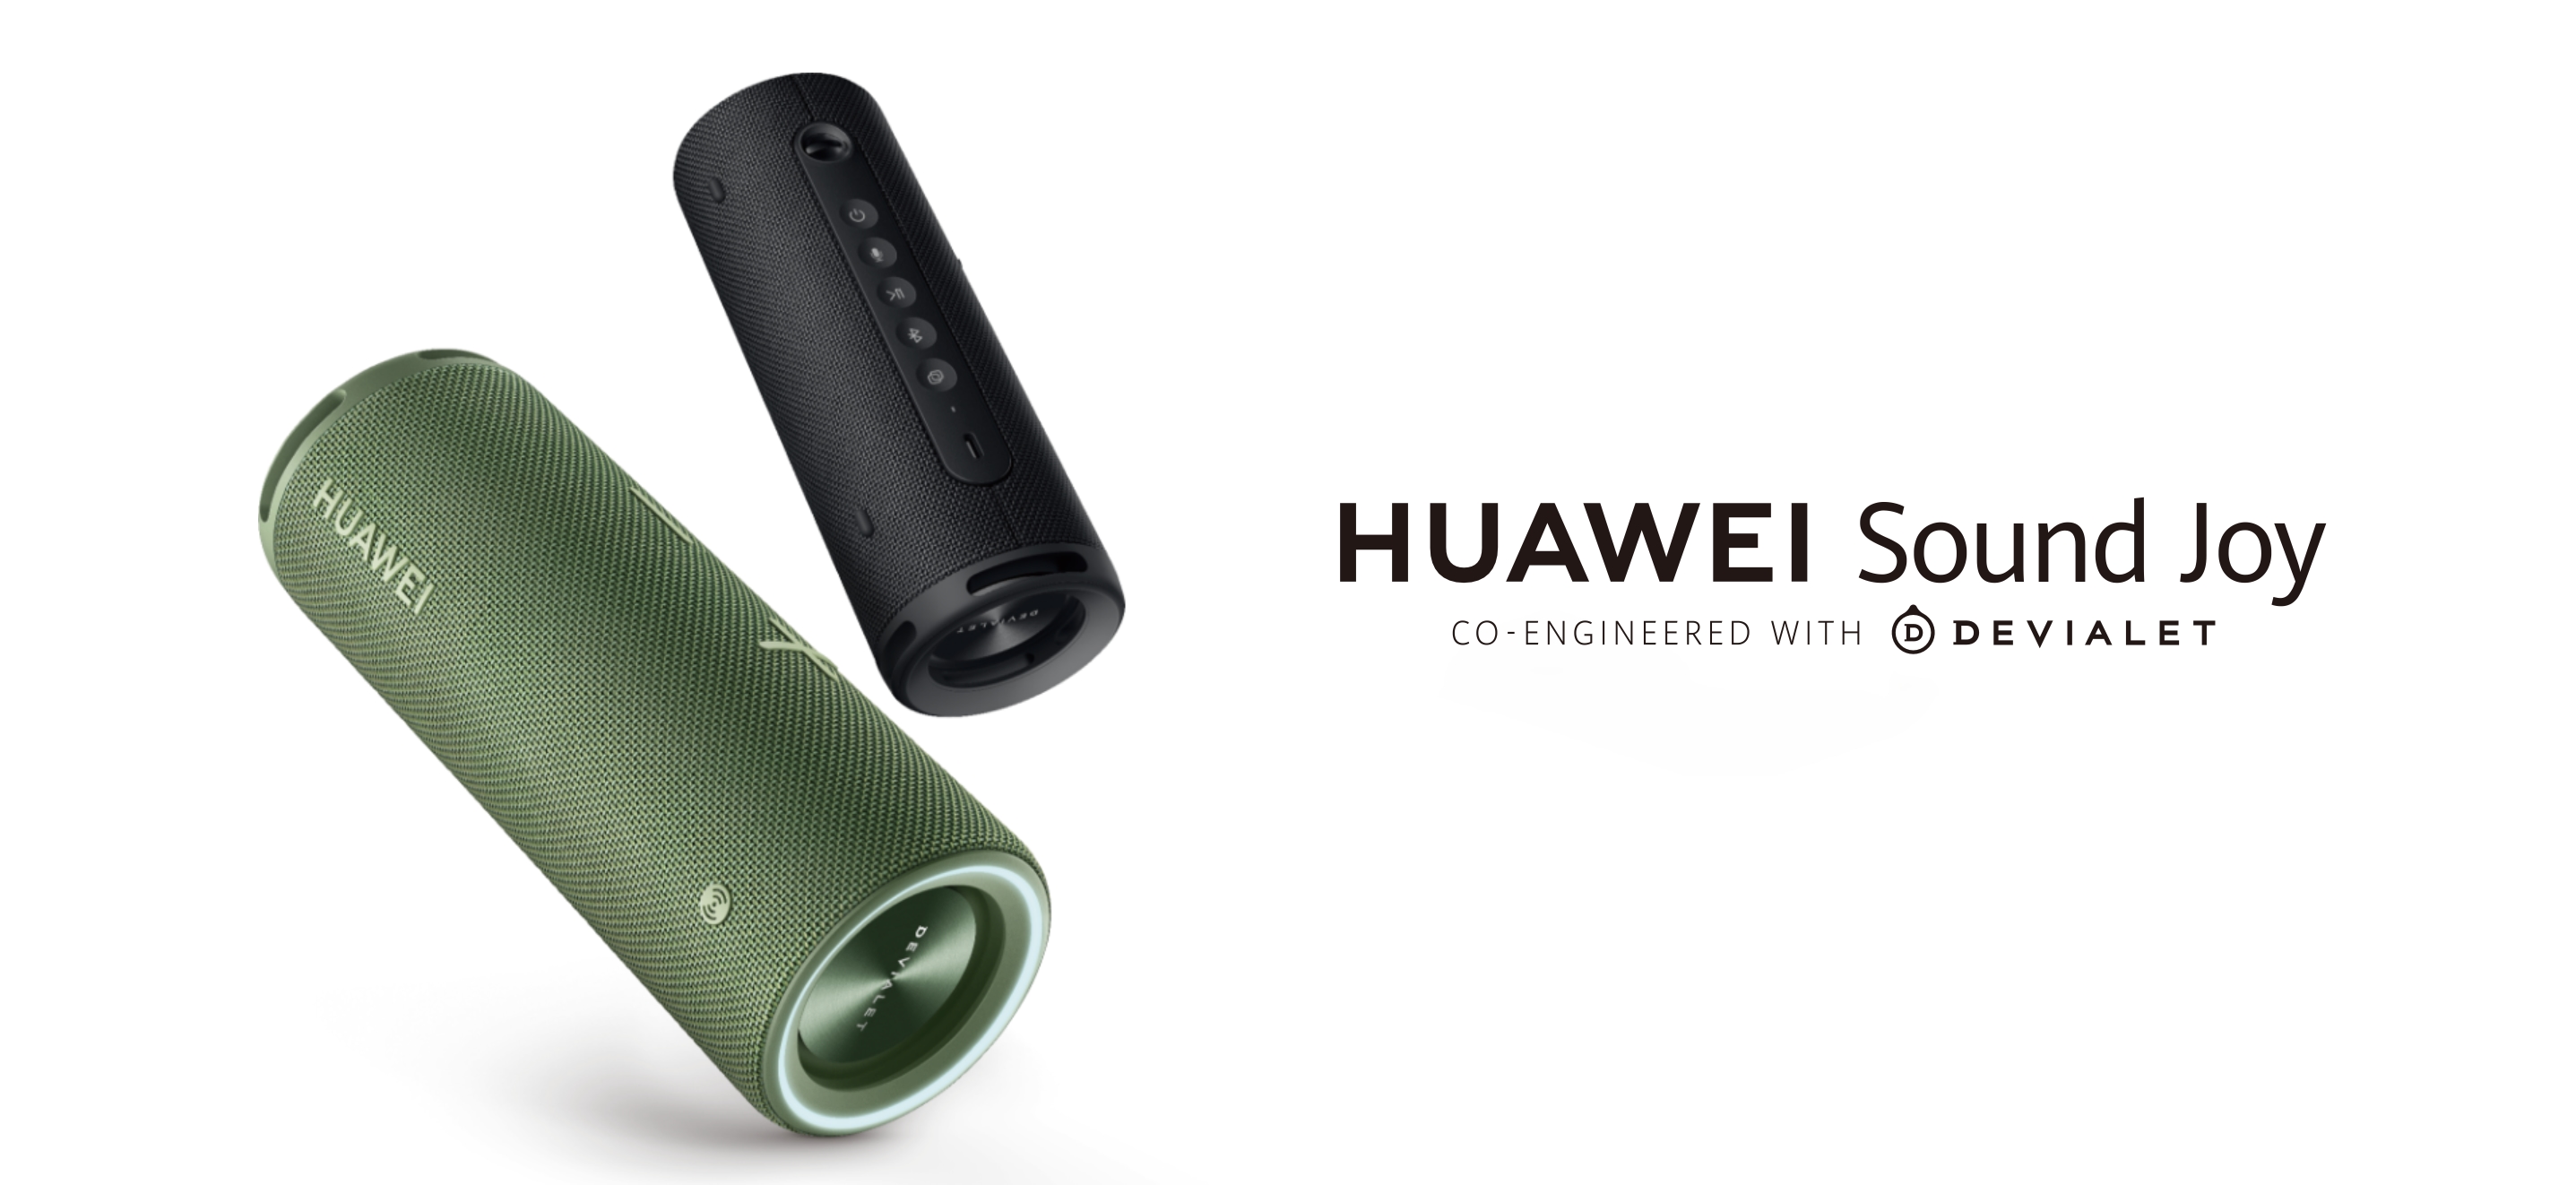 Huawei Sound Joy: wireless speaker with four speakers, IP67 protection and 40W fast charging for €149